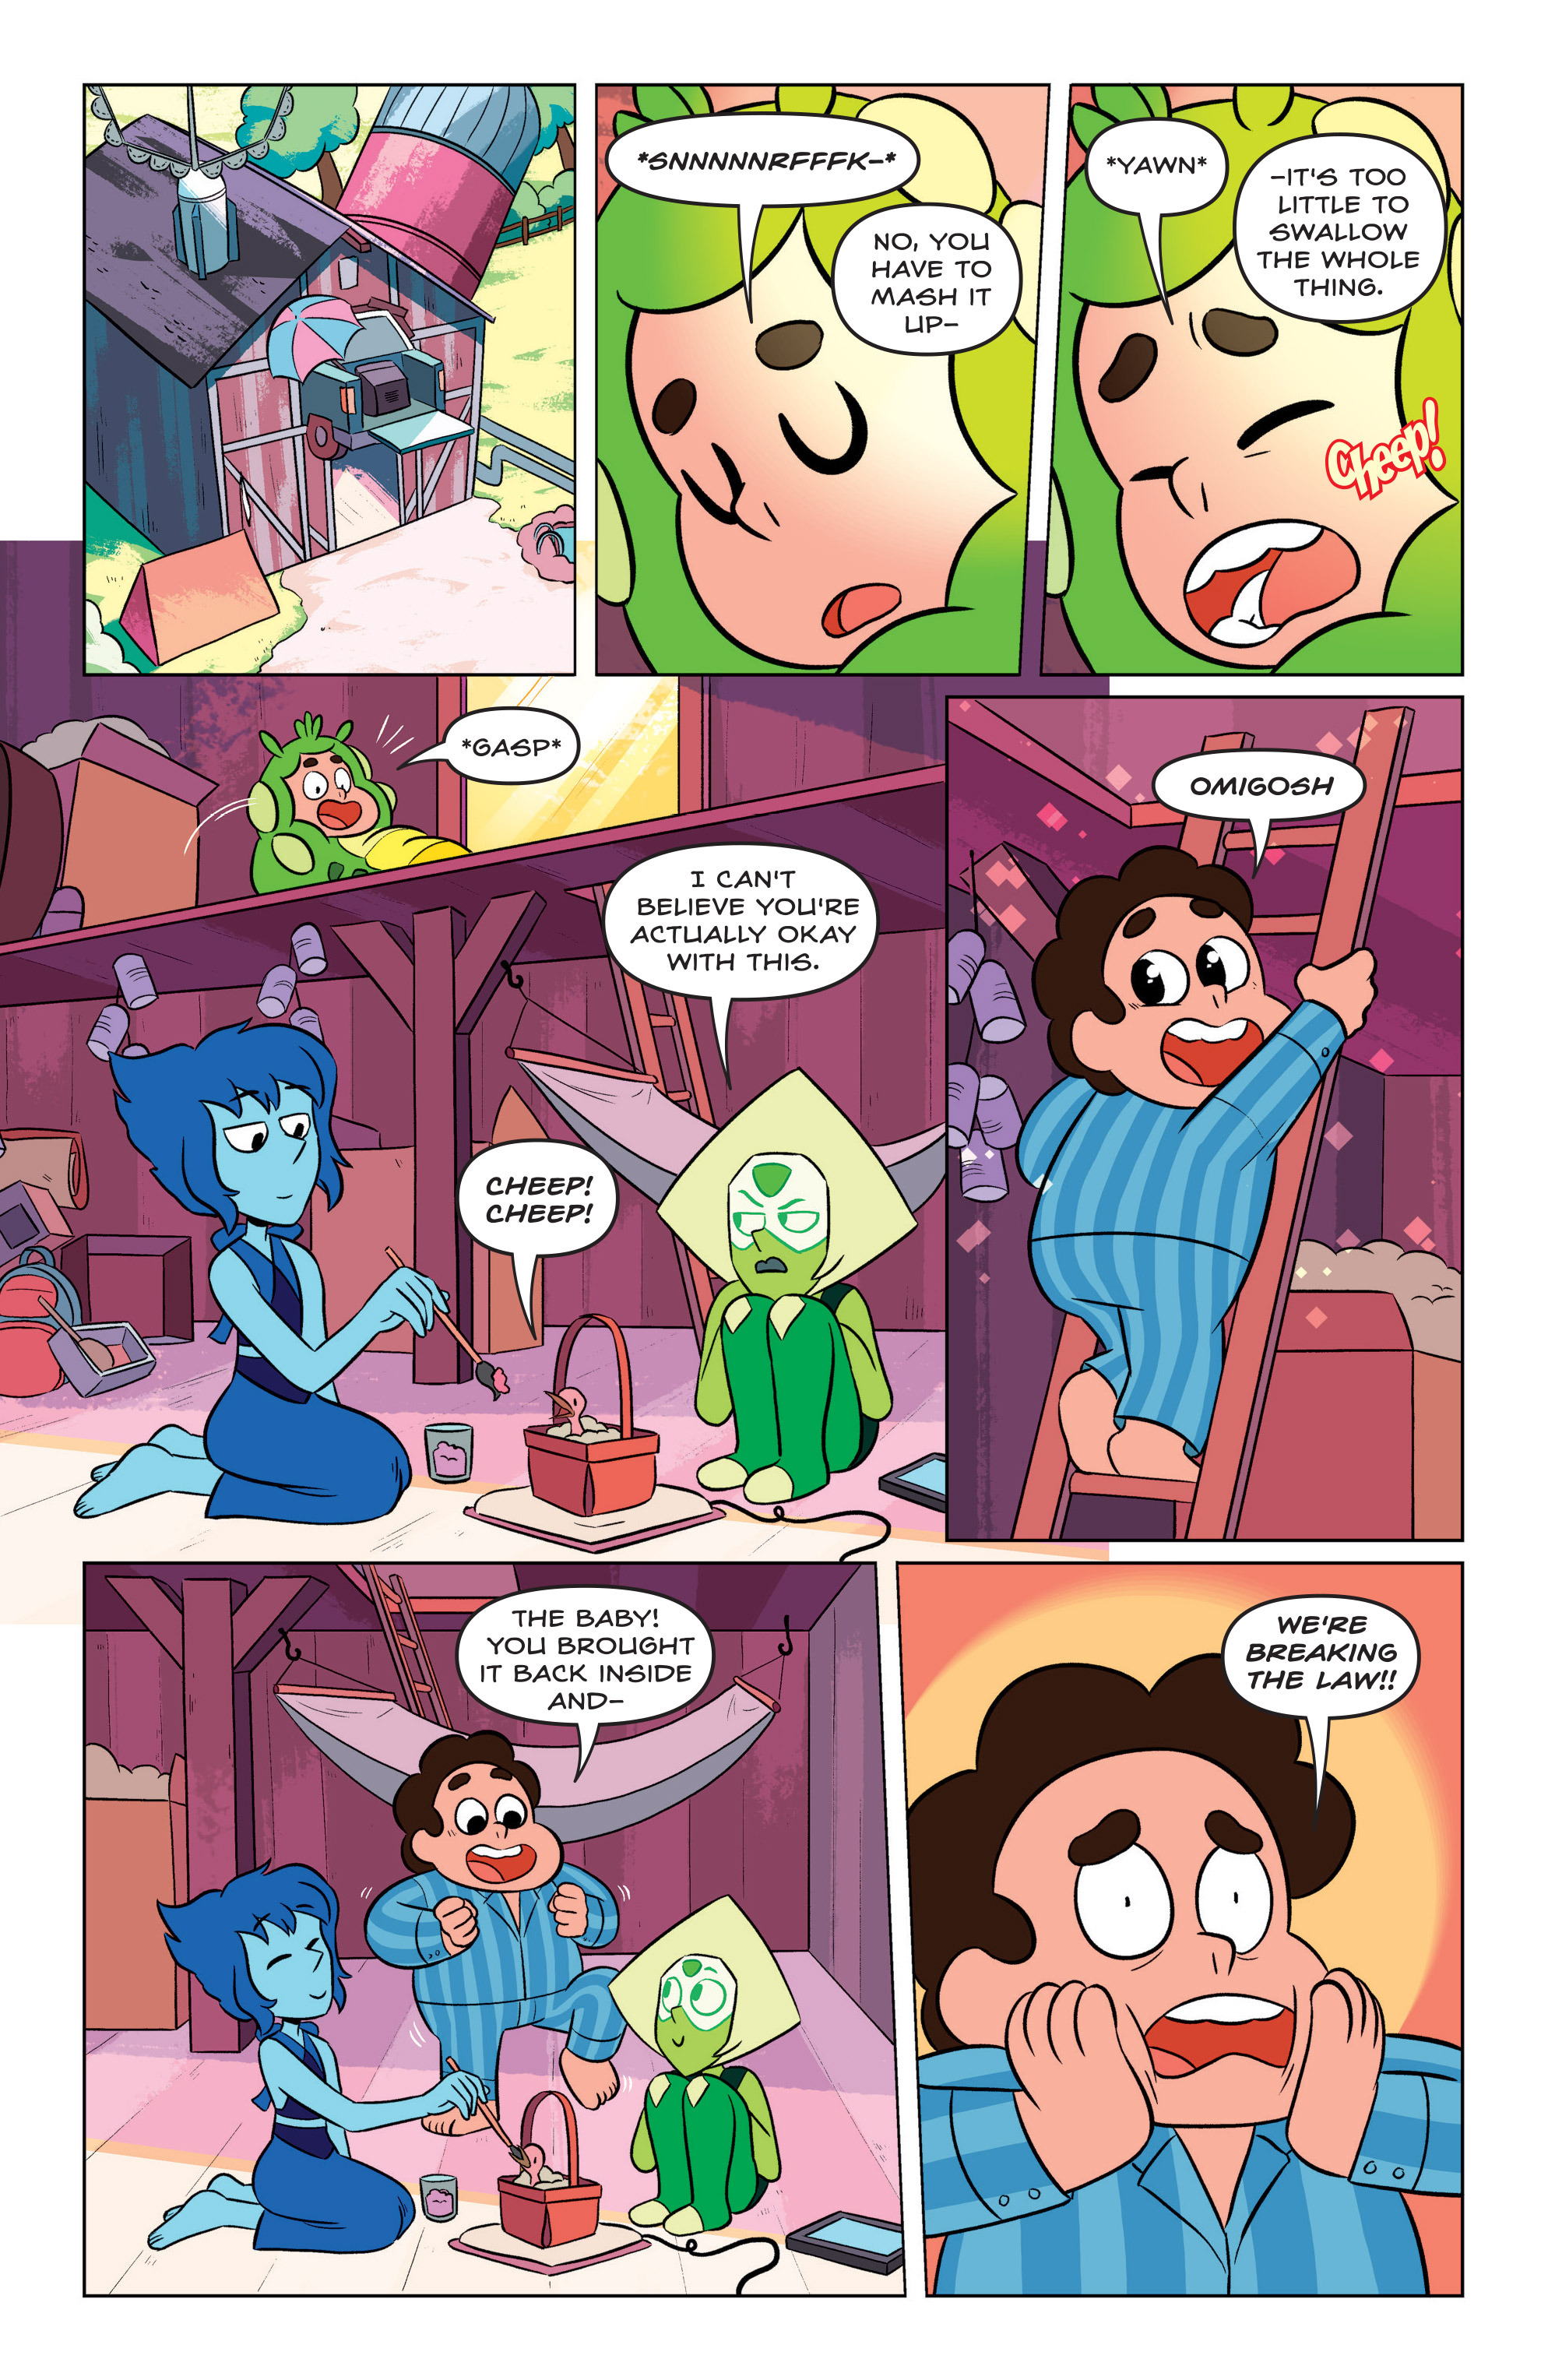 Steven Universe Ongoing 1 Read Steven Universe Ongoing Issue 1 Online Full Page